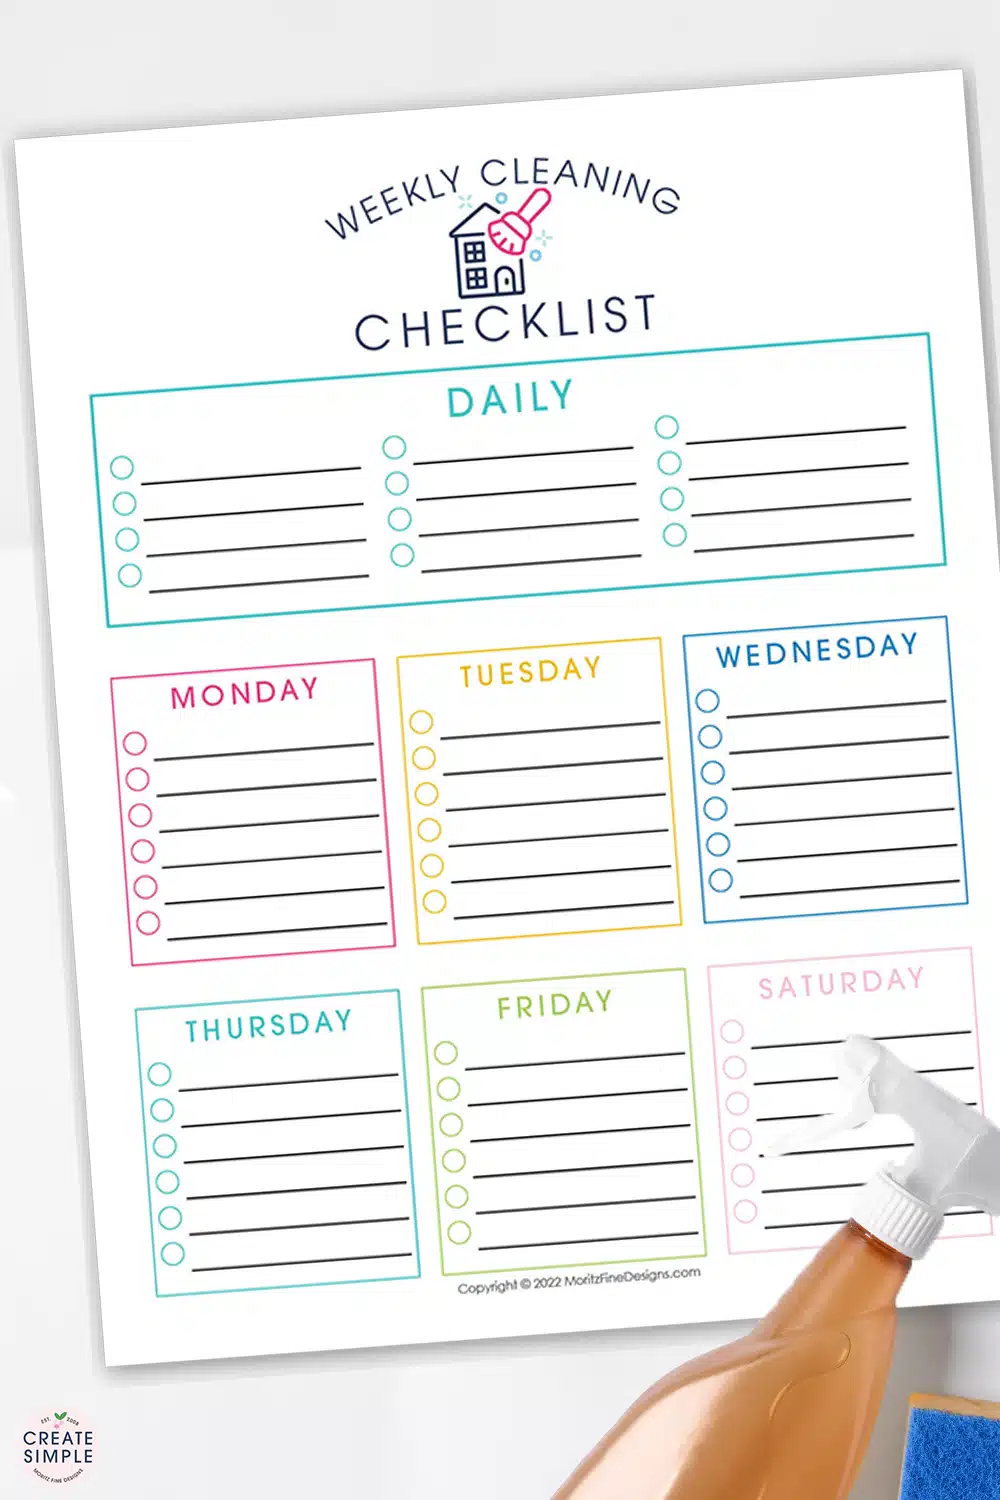 Easily get your cleaning done when you create your very own customizable Weekly Cleaning Checklist with the free printable download.